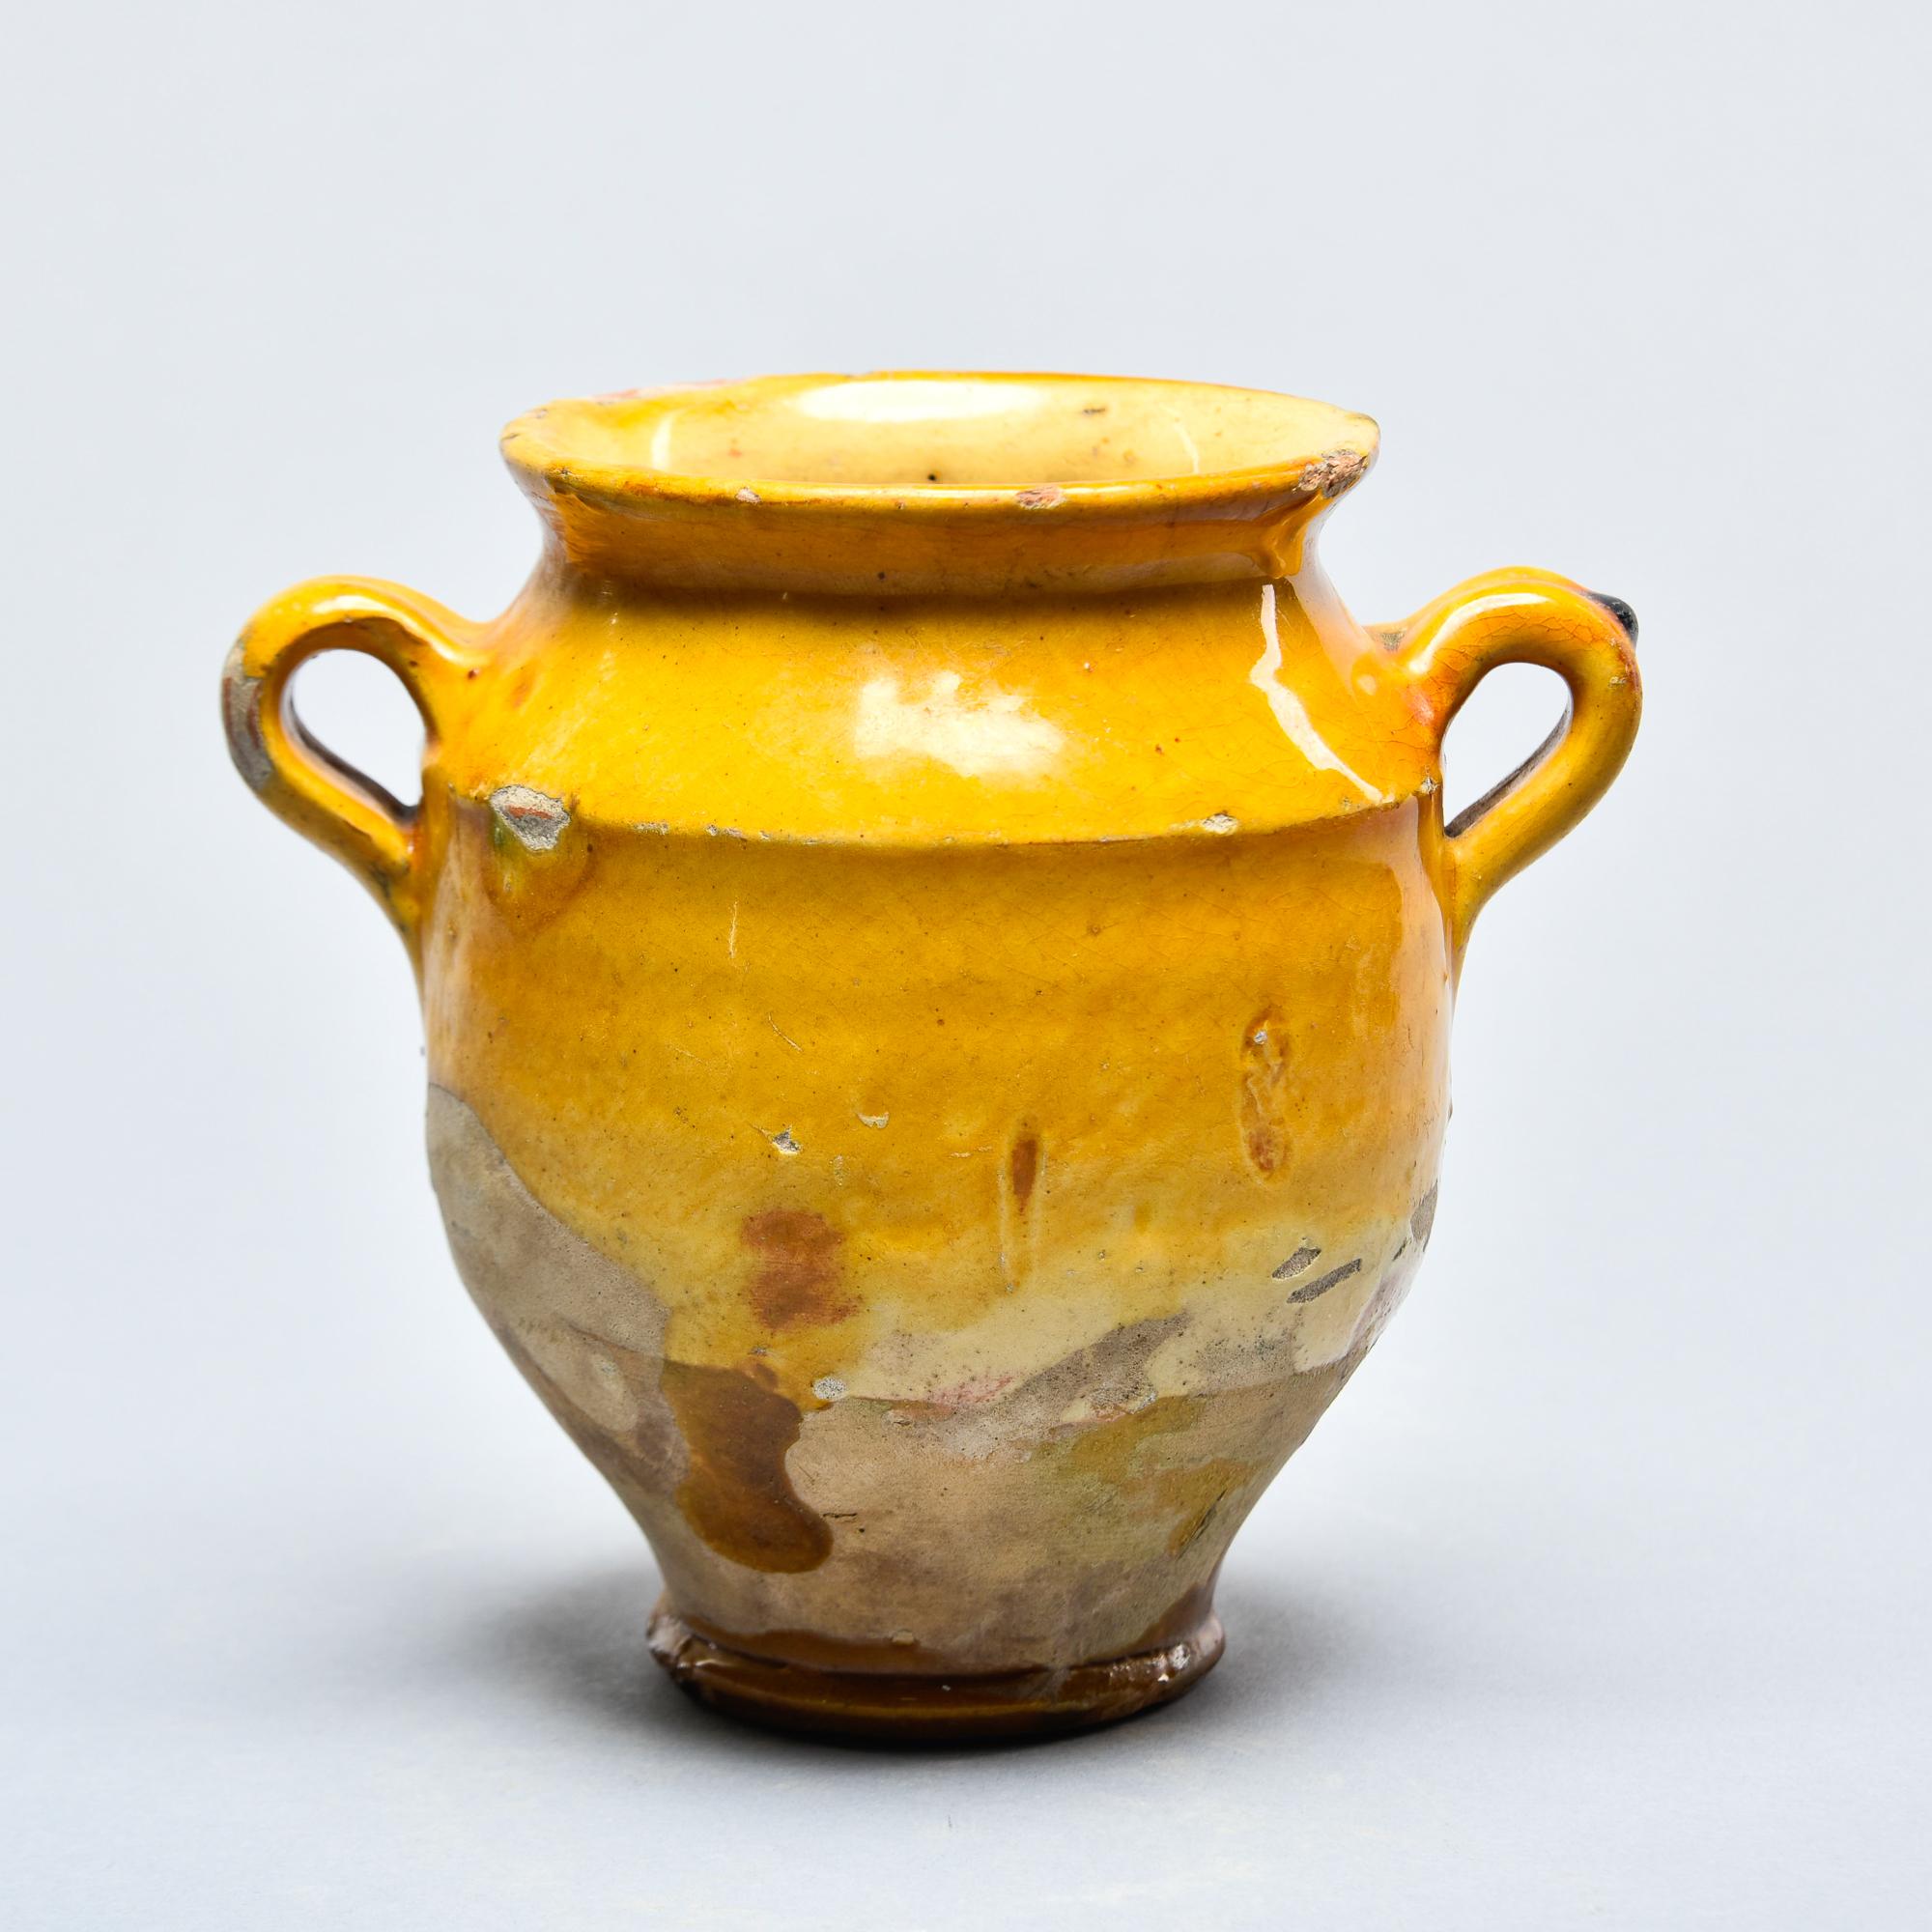 Found in France, this French confit jar dates from approximately 1915. This piece stands 5.5” high and has the traditional form with a wide vessel body and two handles on the sides with a mustard-colored glaze on the outside top half and fully